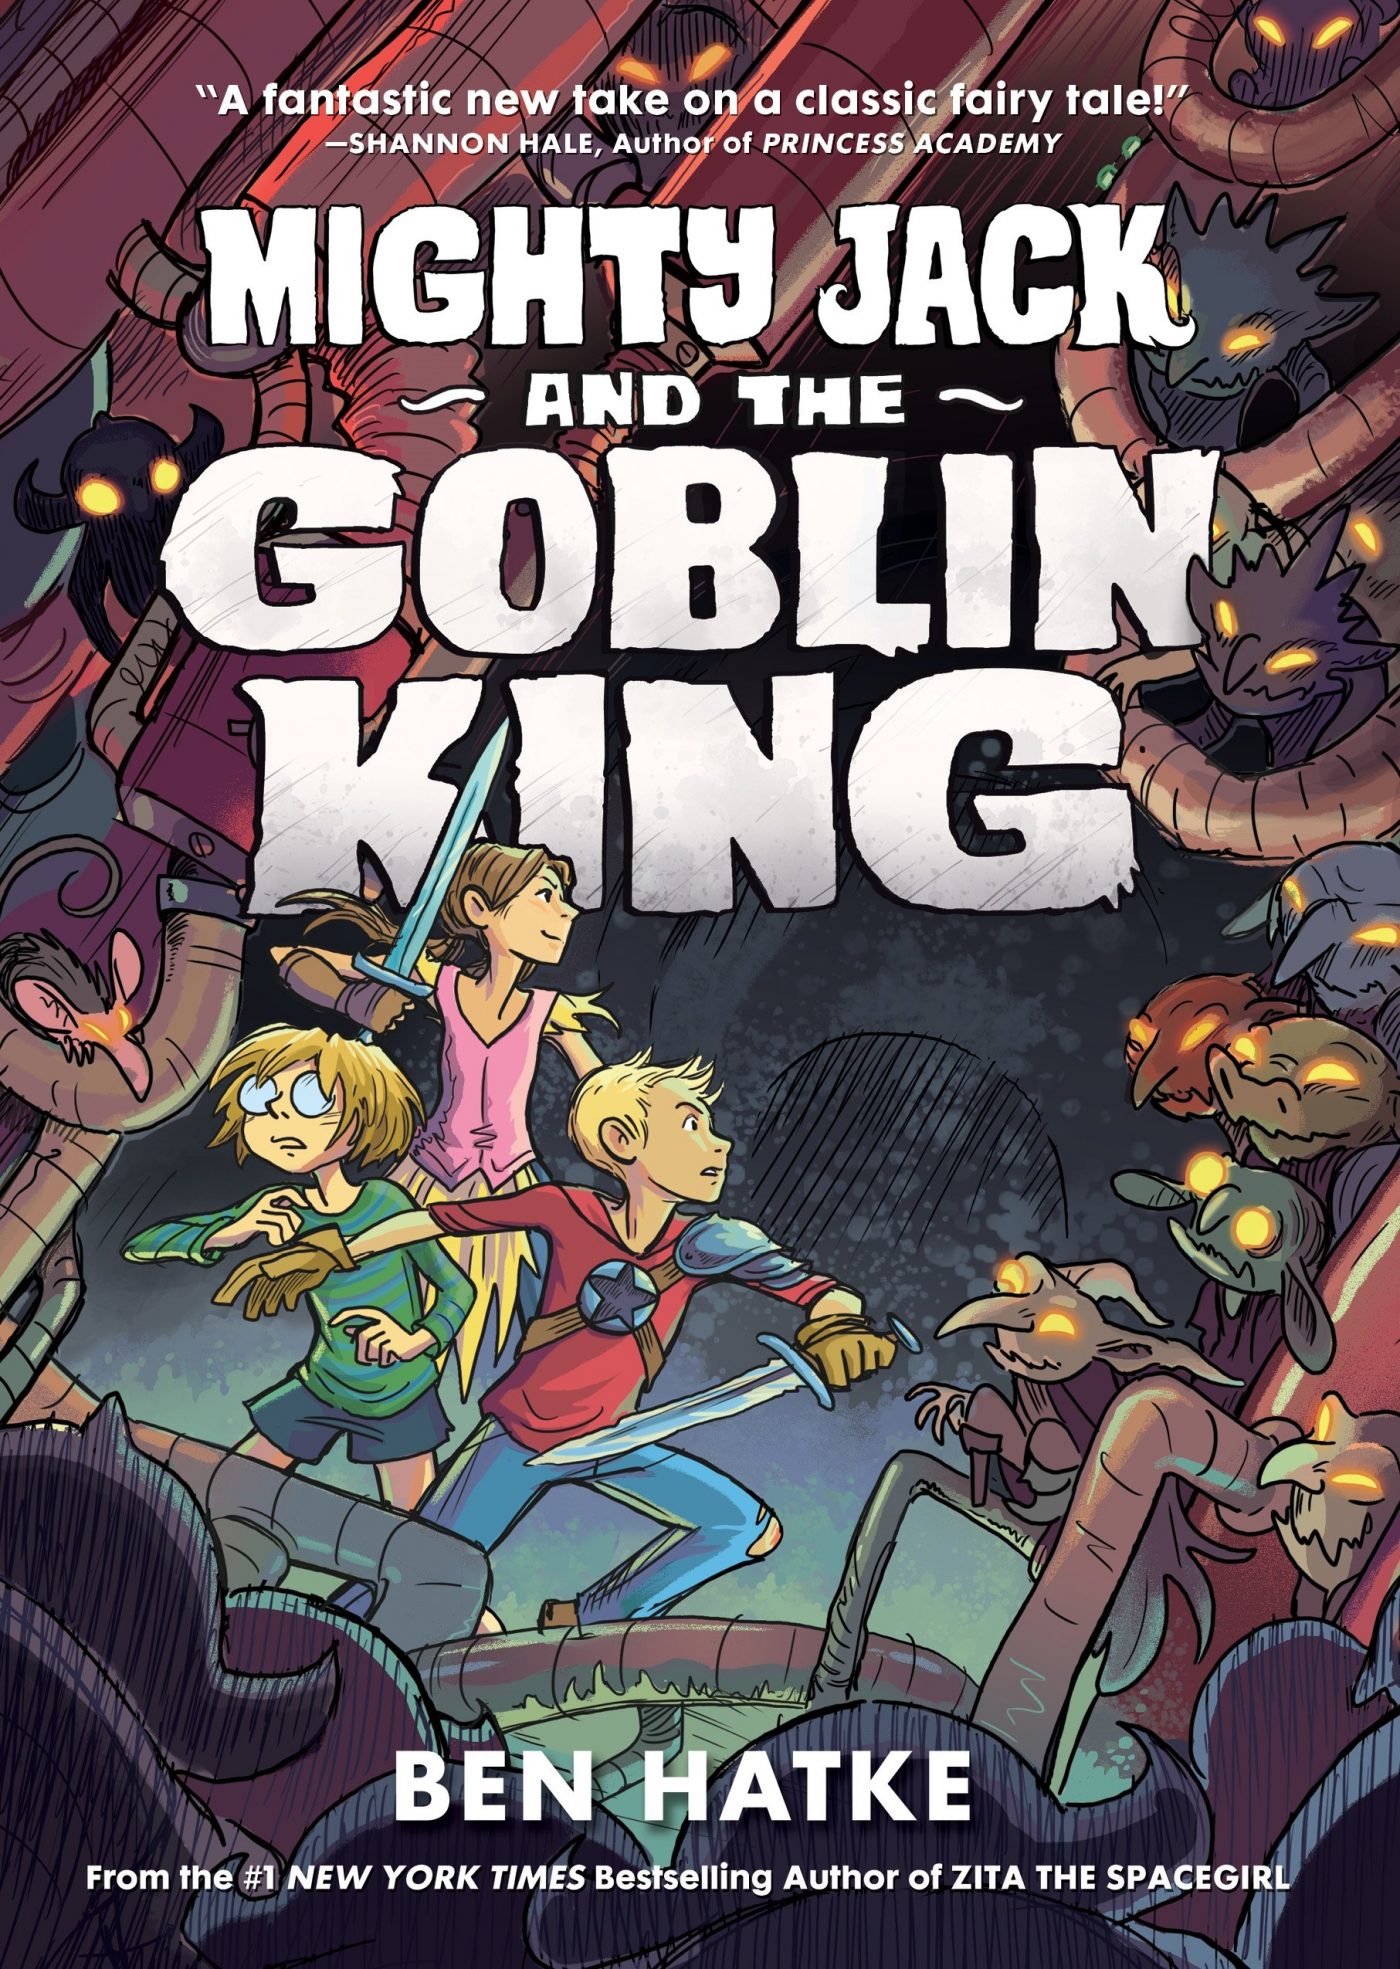 'Mighty Jack and the Goblin King' review: Jack and the Beanstalk meets Henson's Labyrinth